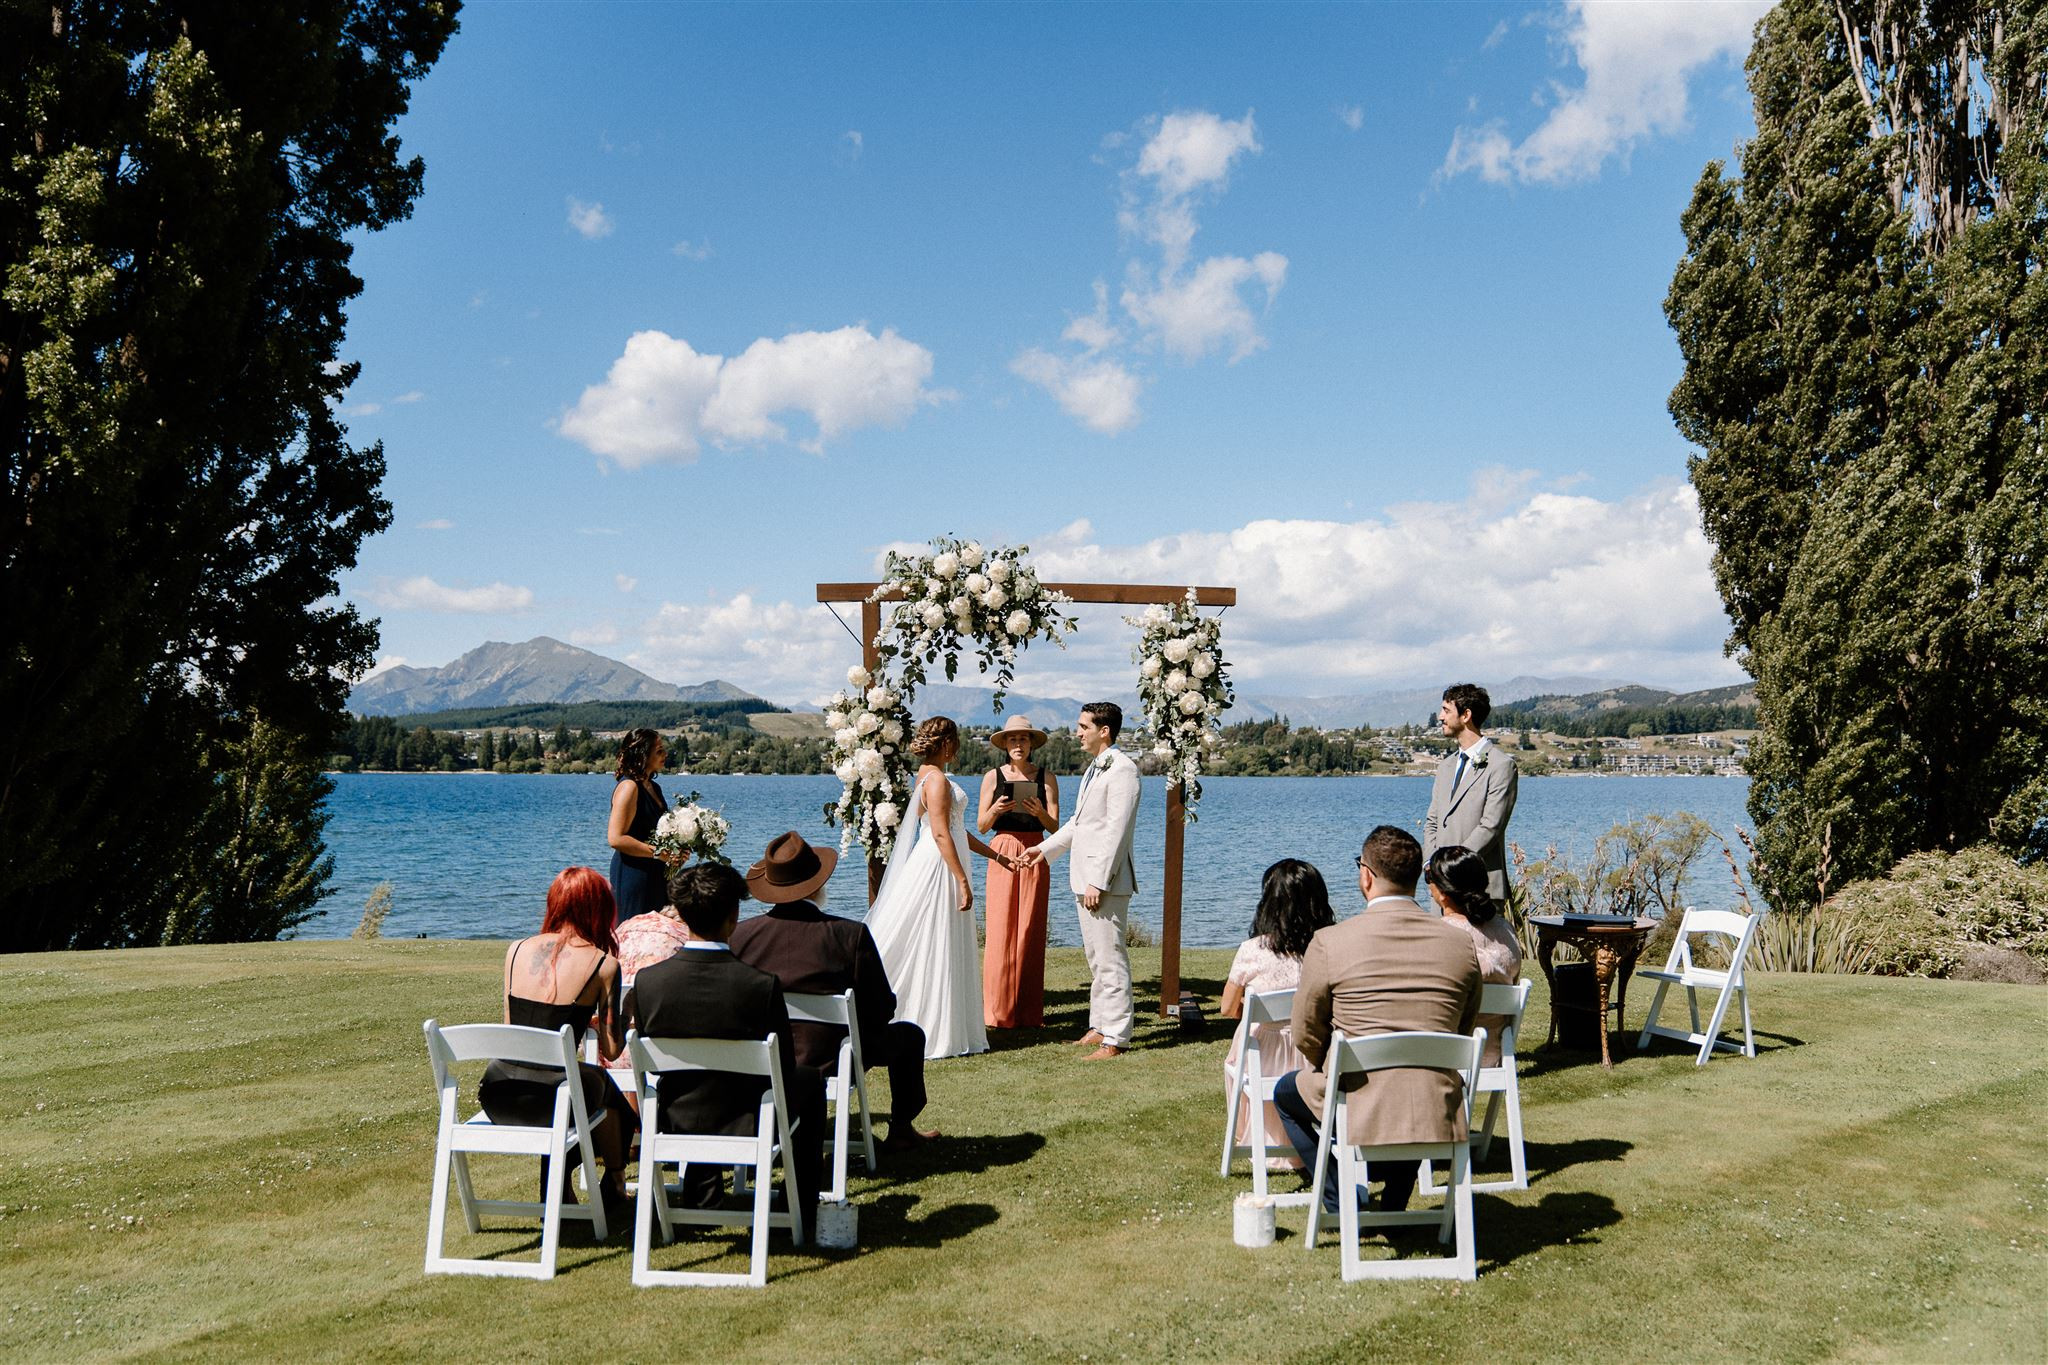 D&S's wanaka wedding ceremony on Edgewater's lawns. Lake Wānaka in the distance